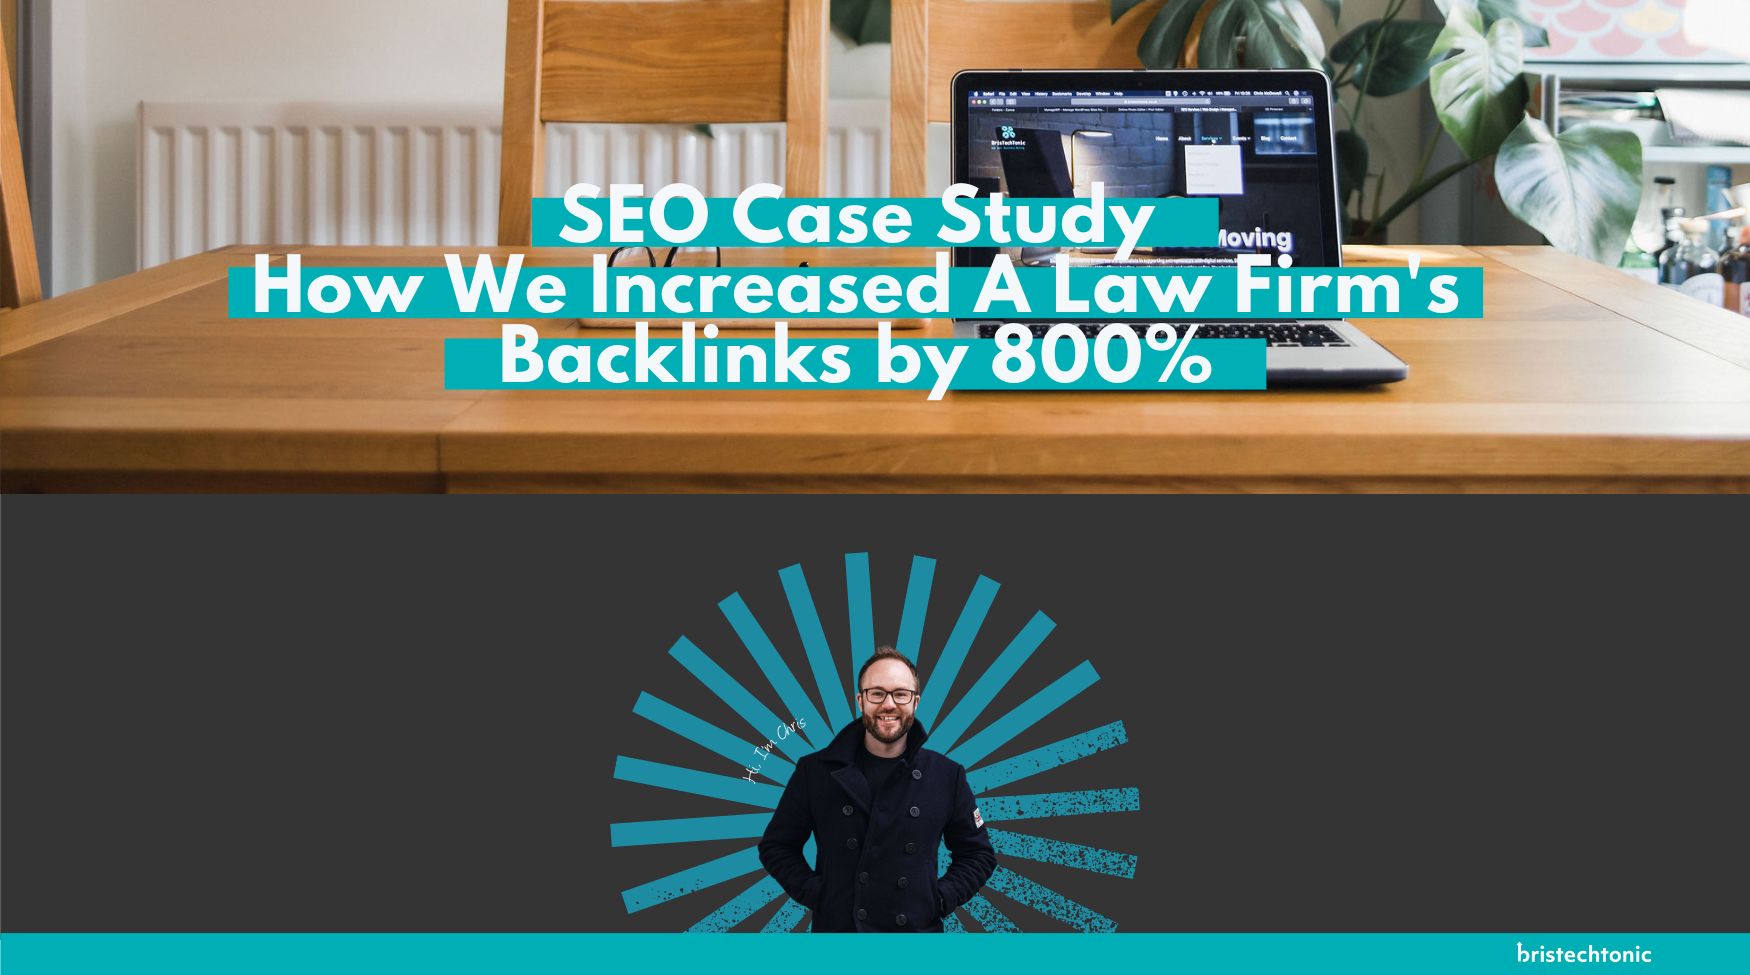 How We Increased A Law Firm's Backlinks by 800%